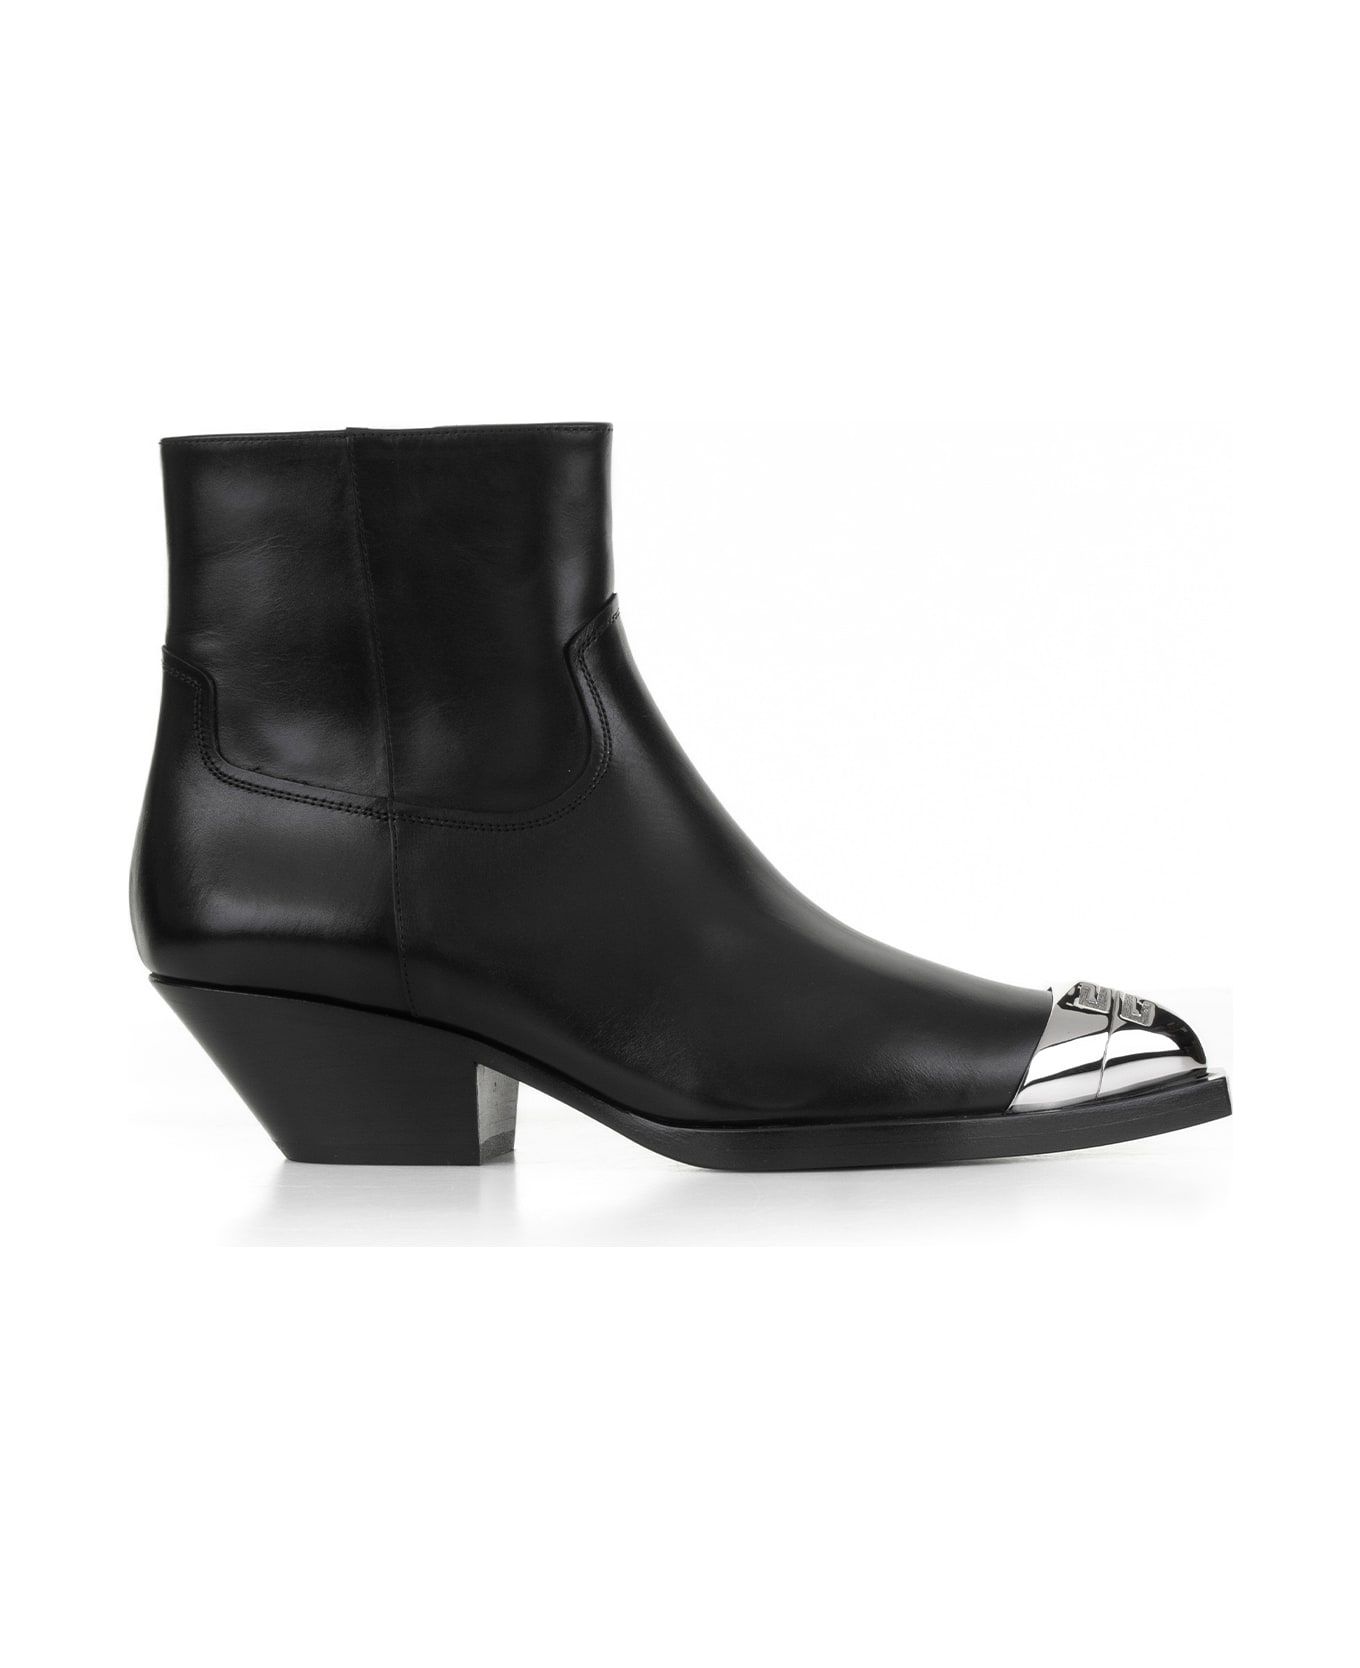 Givenchy Ankle Boots - NERO